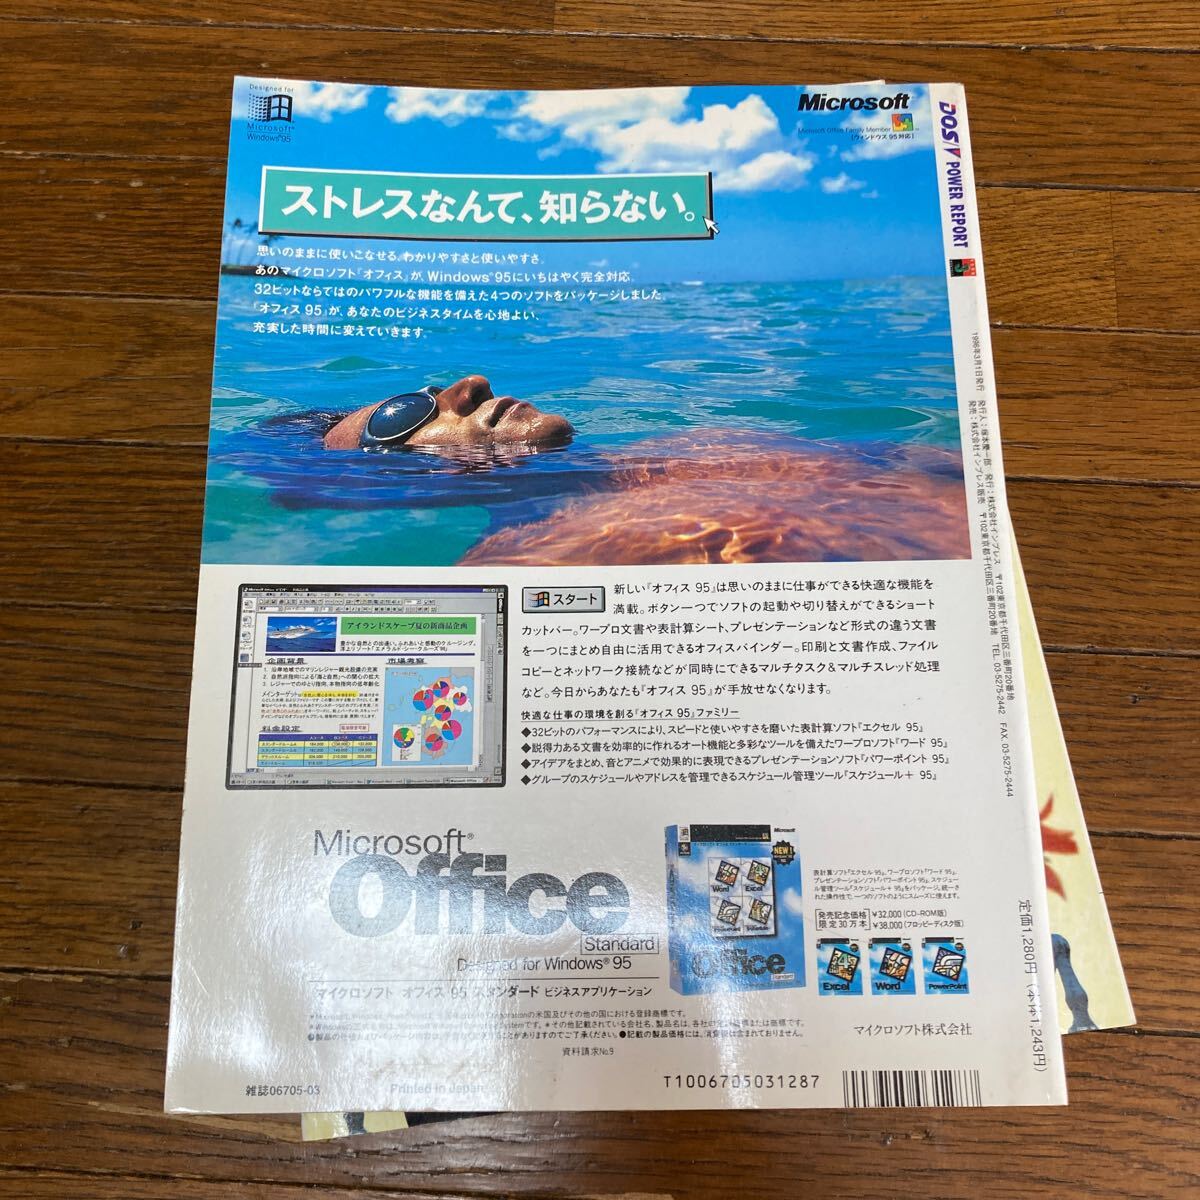 DOS/V POWER REPORT 1996年版　ドスブイパワーレポート　雑誌　不揃い9冊セット　まとめ売り_画像4